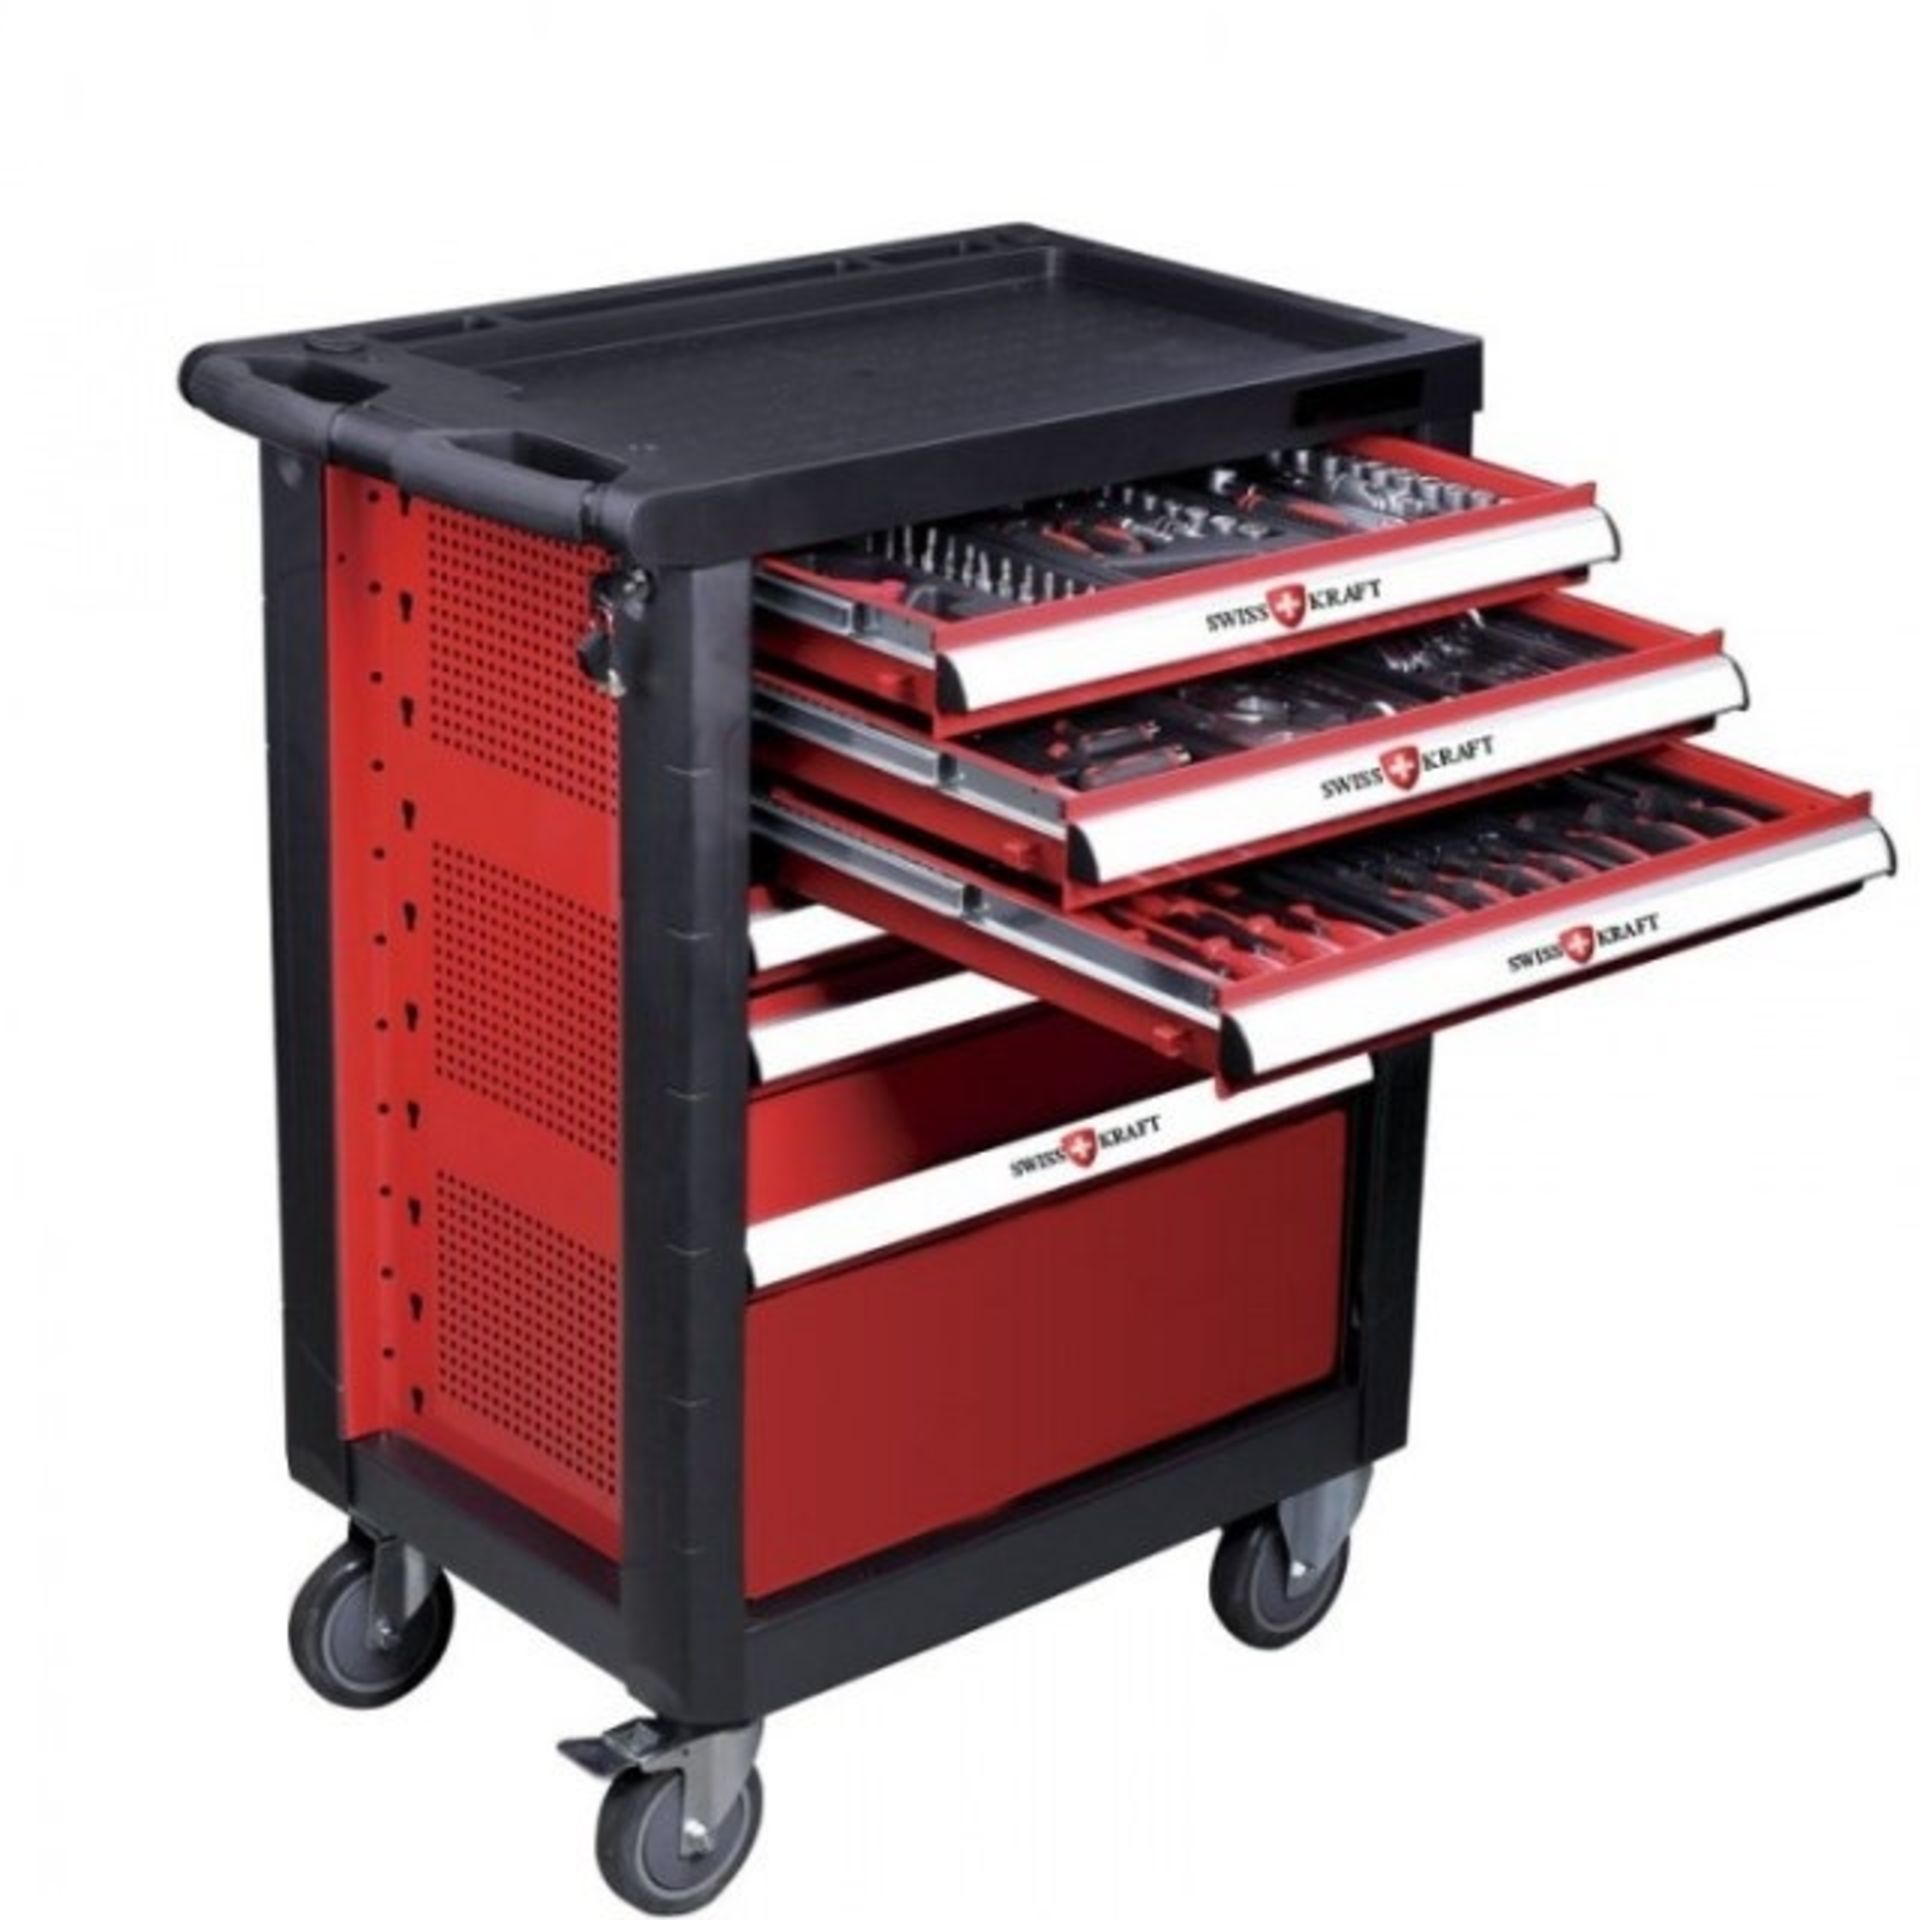 V Brand New Locking professional Tool cabinet With 6 Drawers On Castors RRP 1999 Euros (Includes